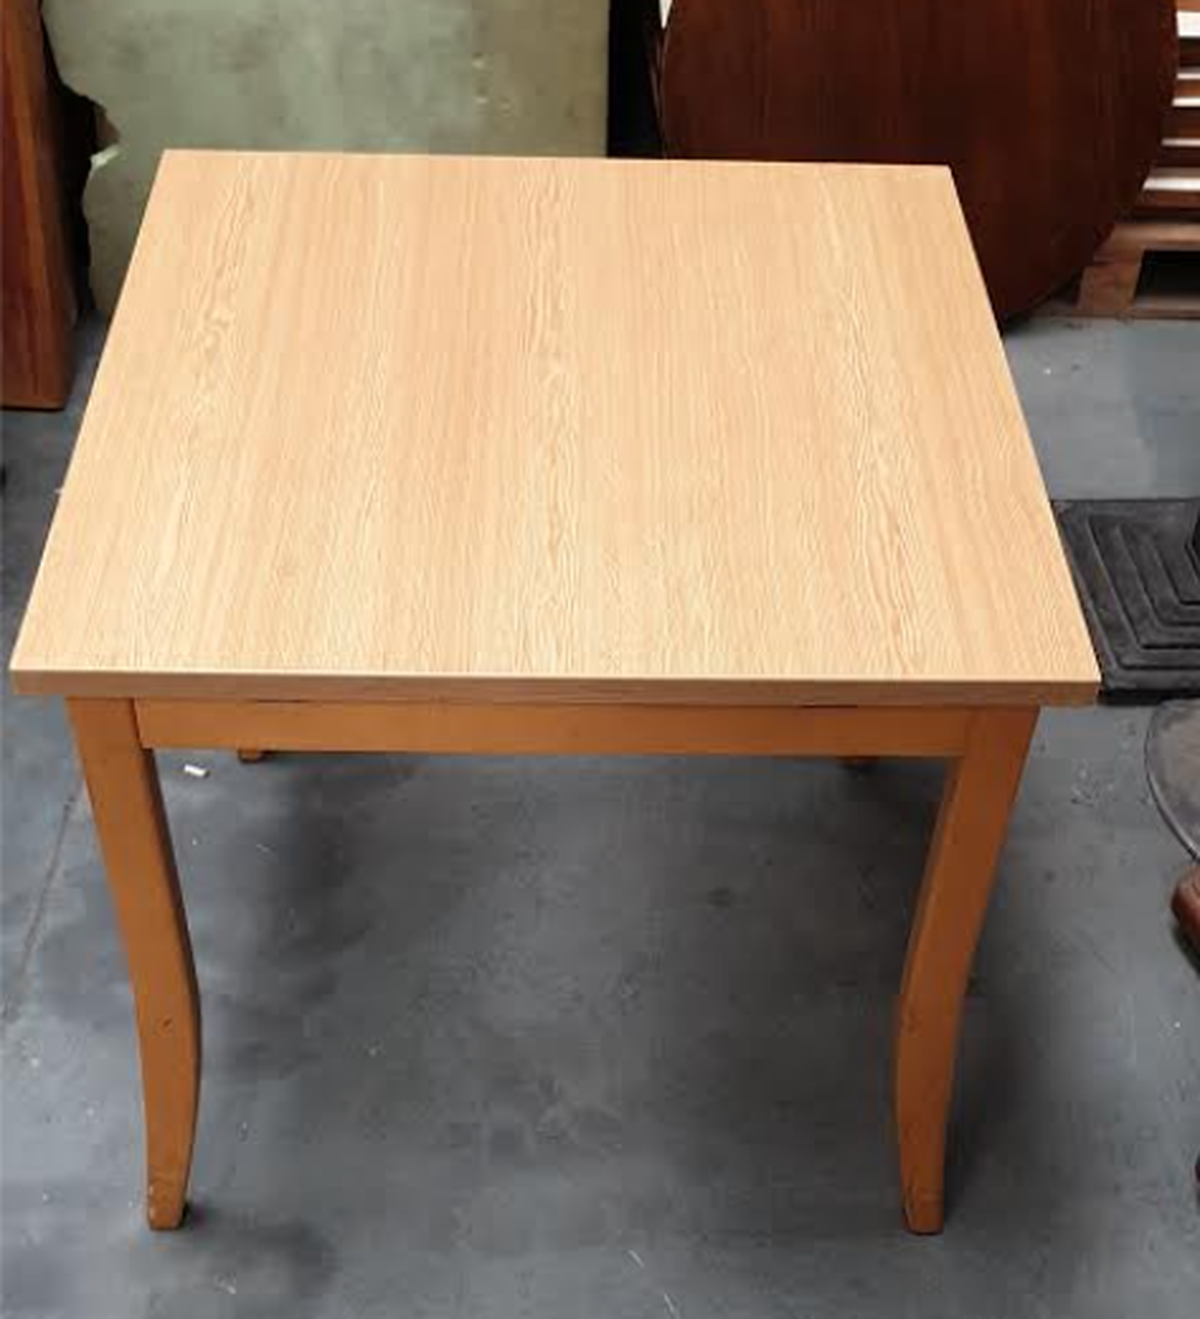 Secondhand Chairs and Tables | Restaurant or Cafe Tables | 13x Used